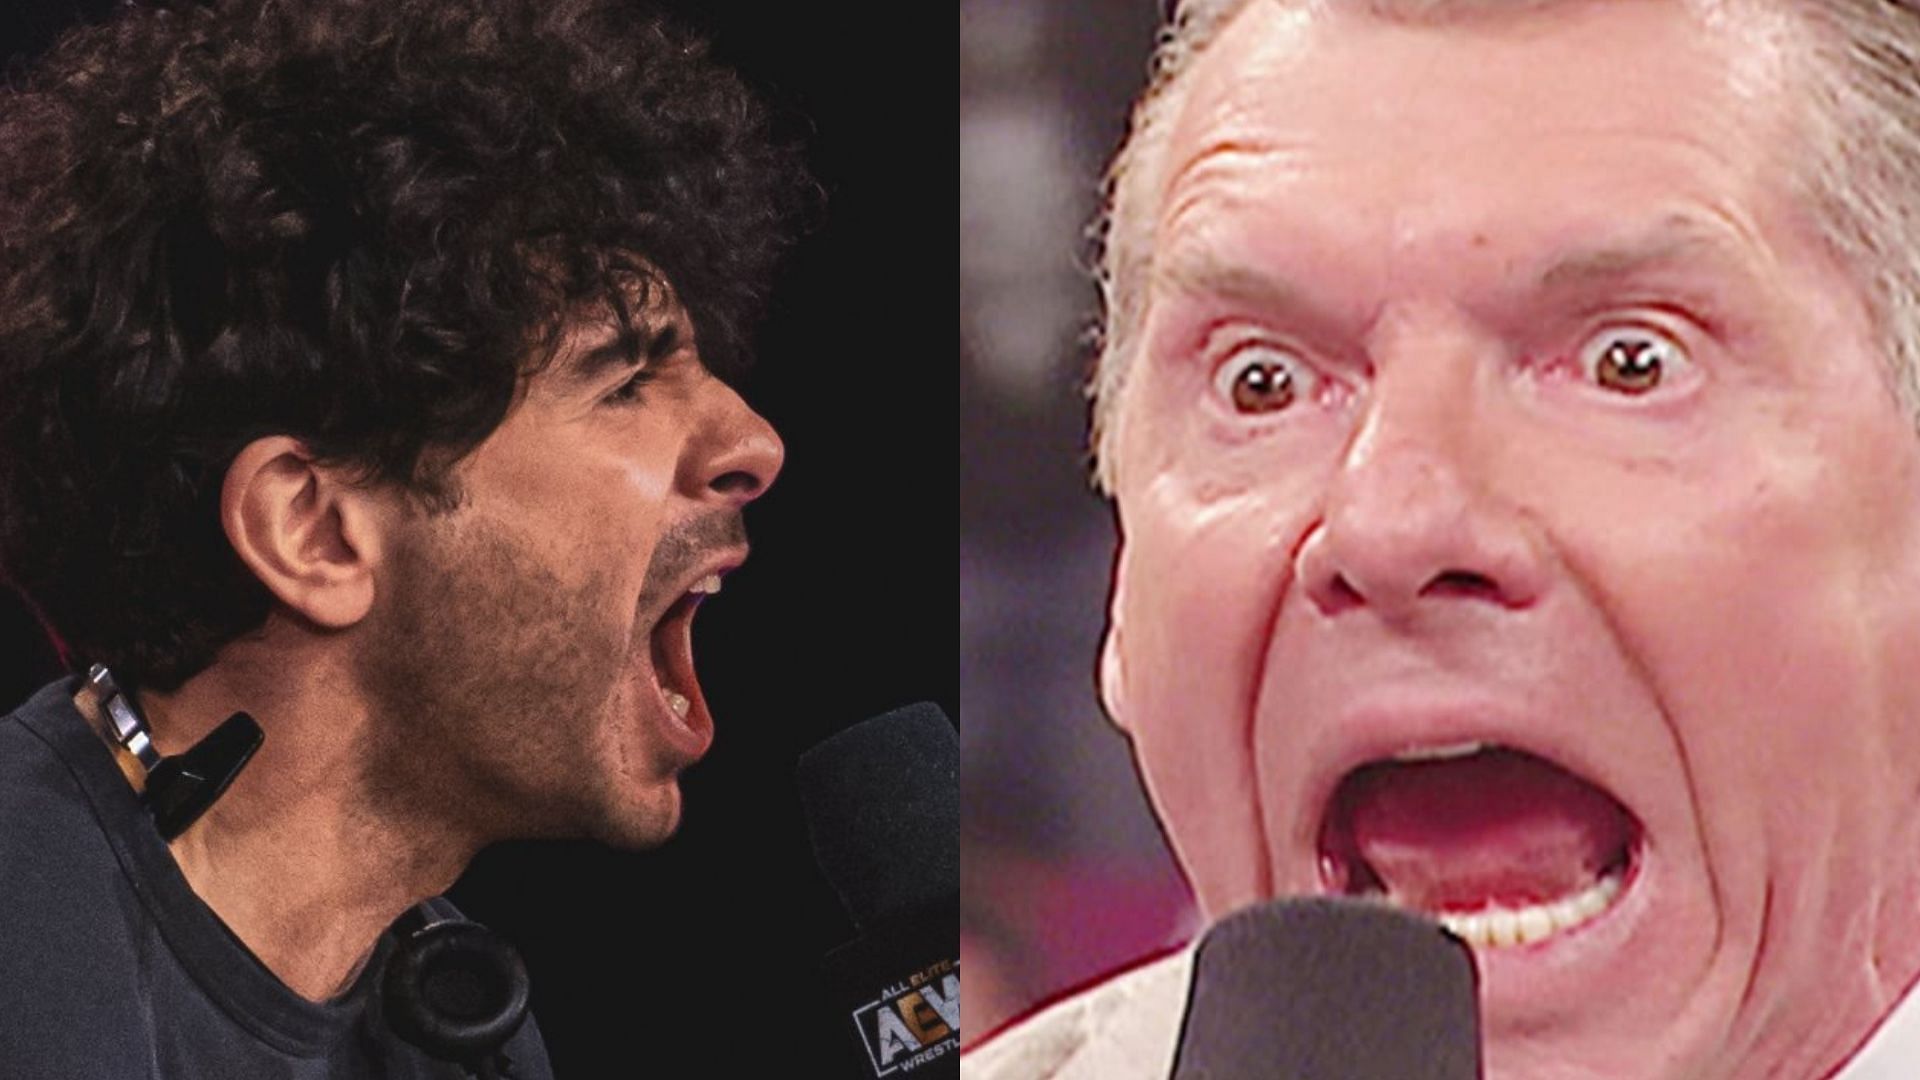 A former WWE Superstar has compared Tony Khan and Vince McMahon